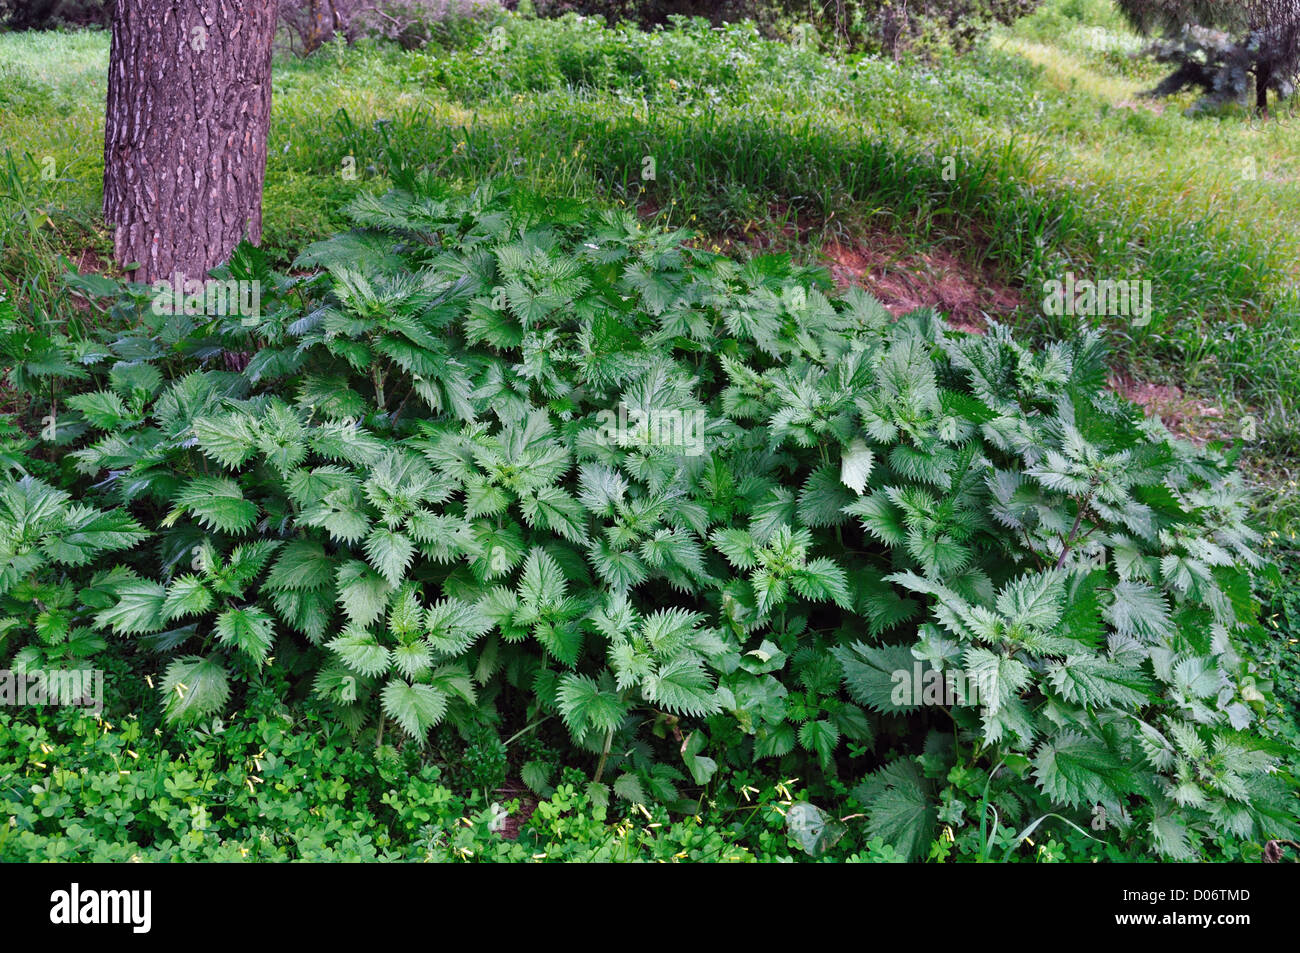 Stinging nettle herbal plants growing under a tree in the woods. Stock Photo